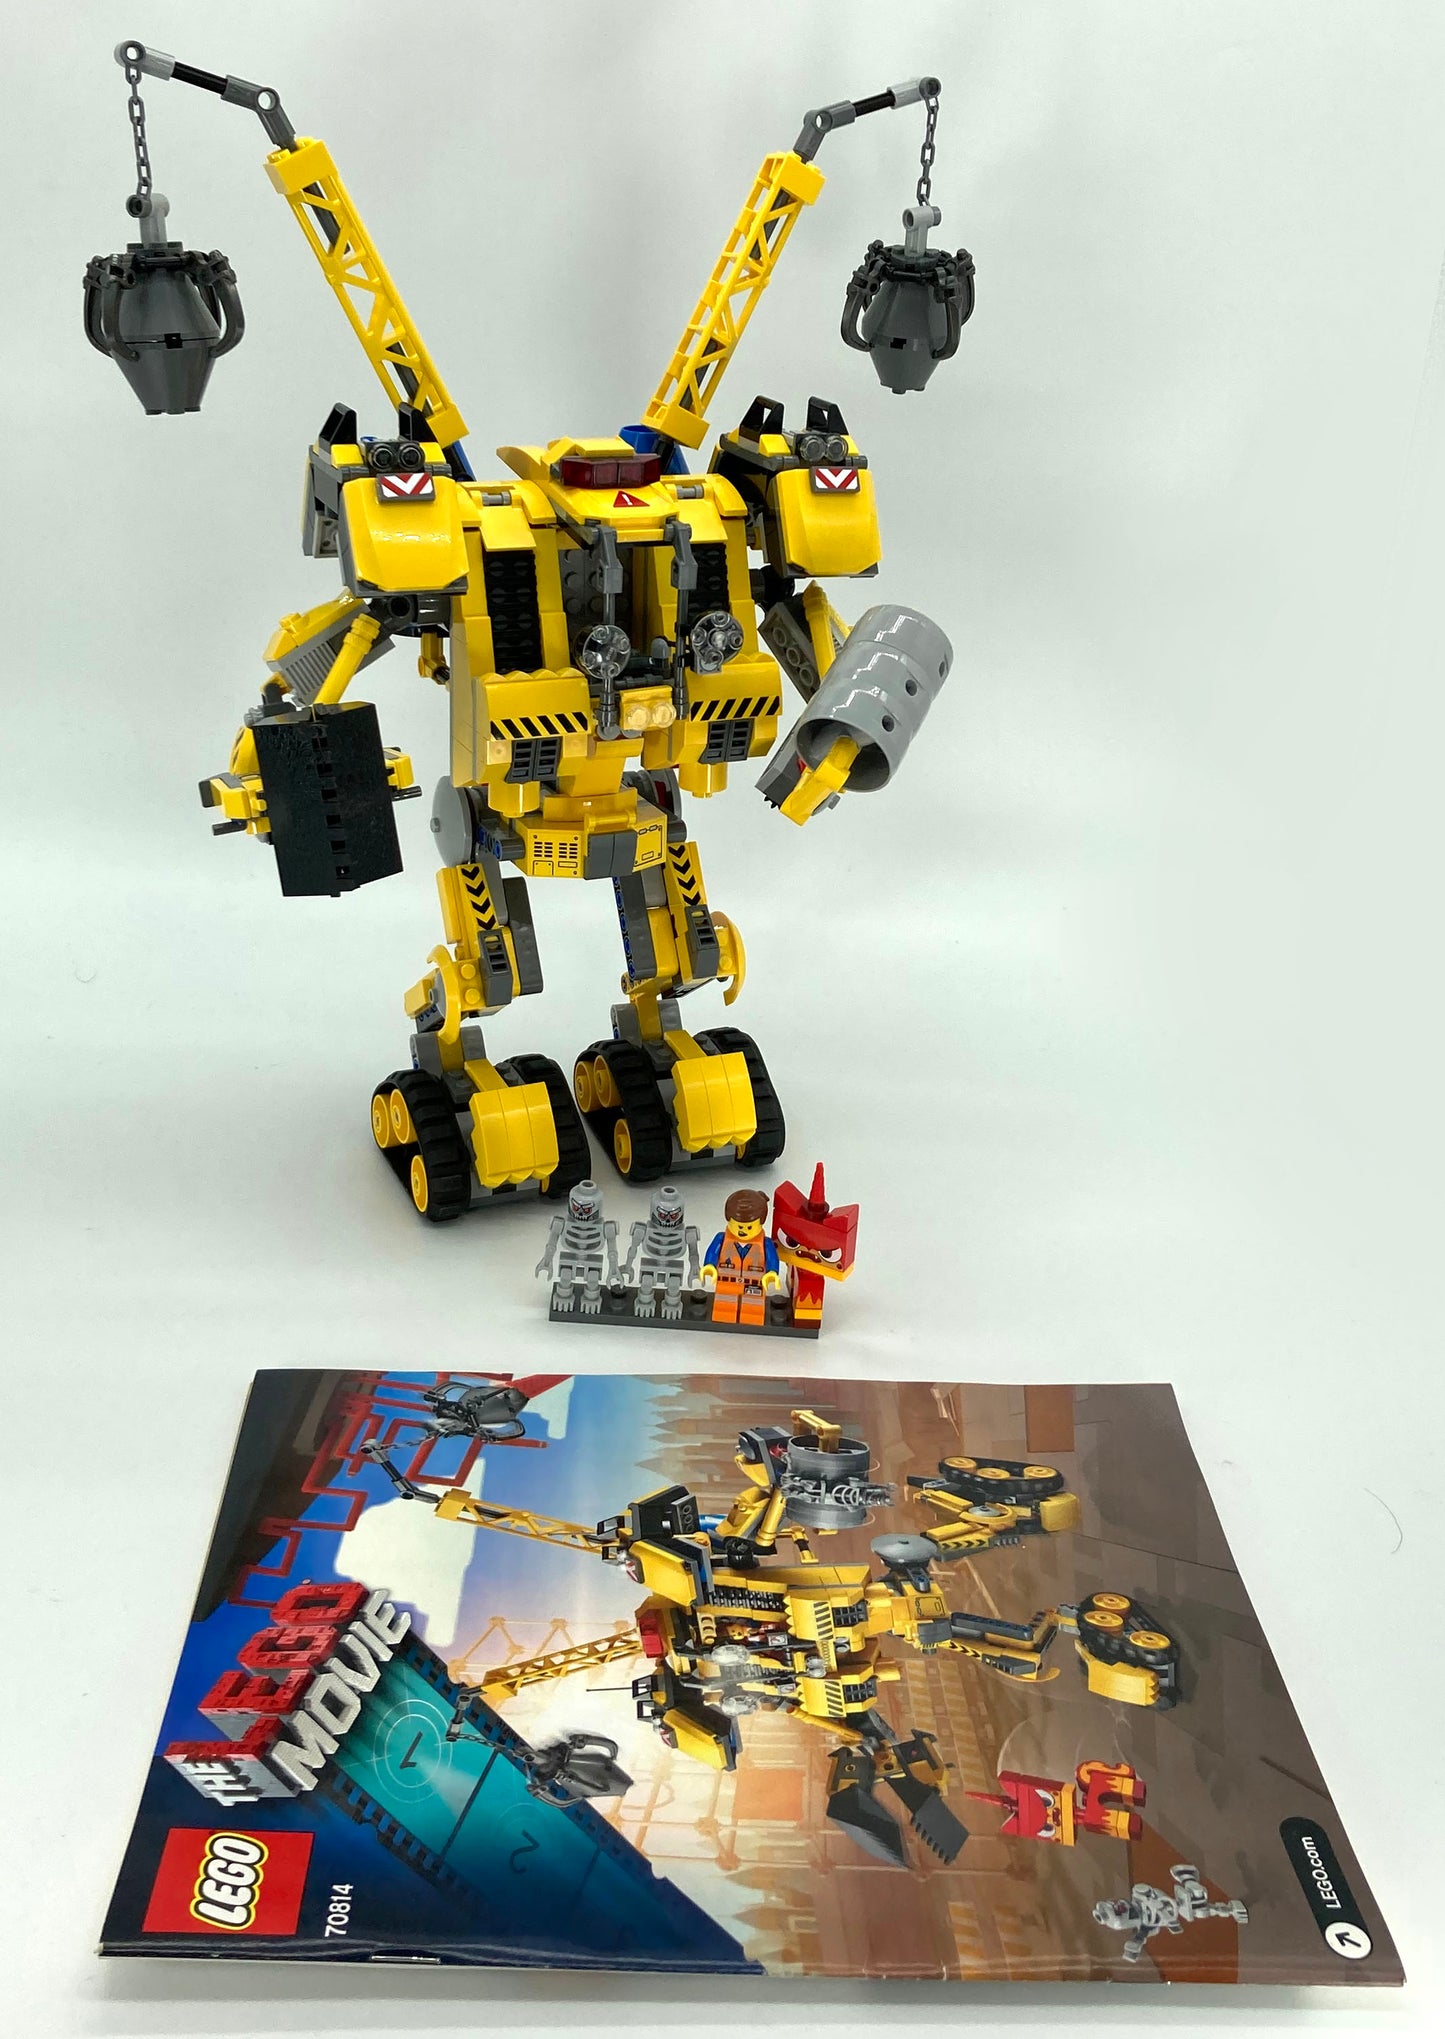 Used Set 70814 Emmet's Construct-o-Mech (with Instruction Manual, No Box)